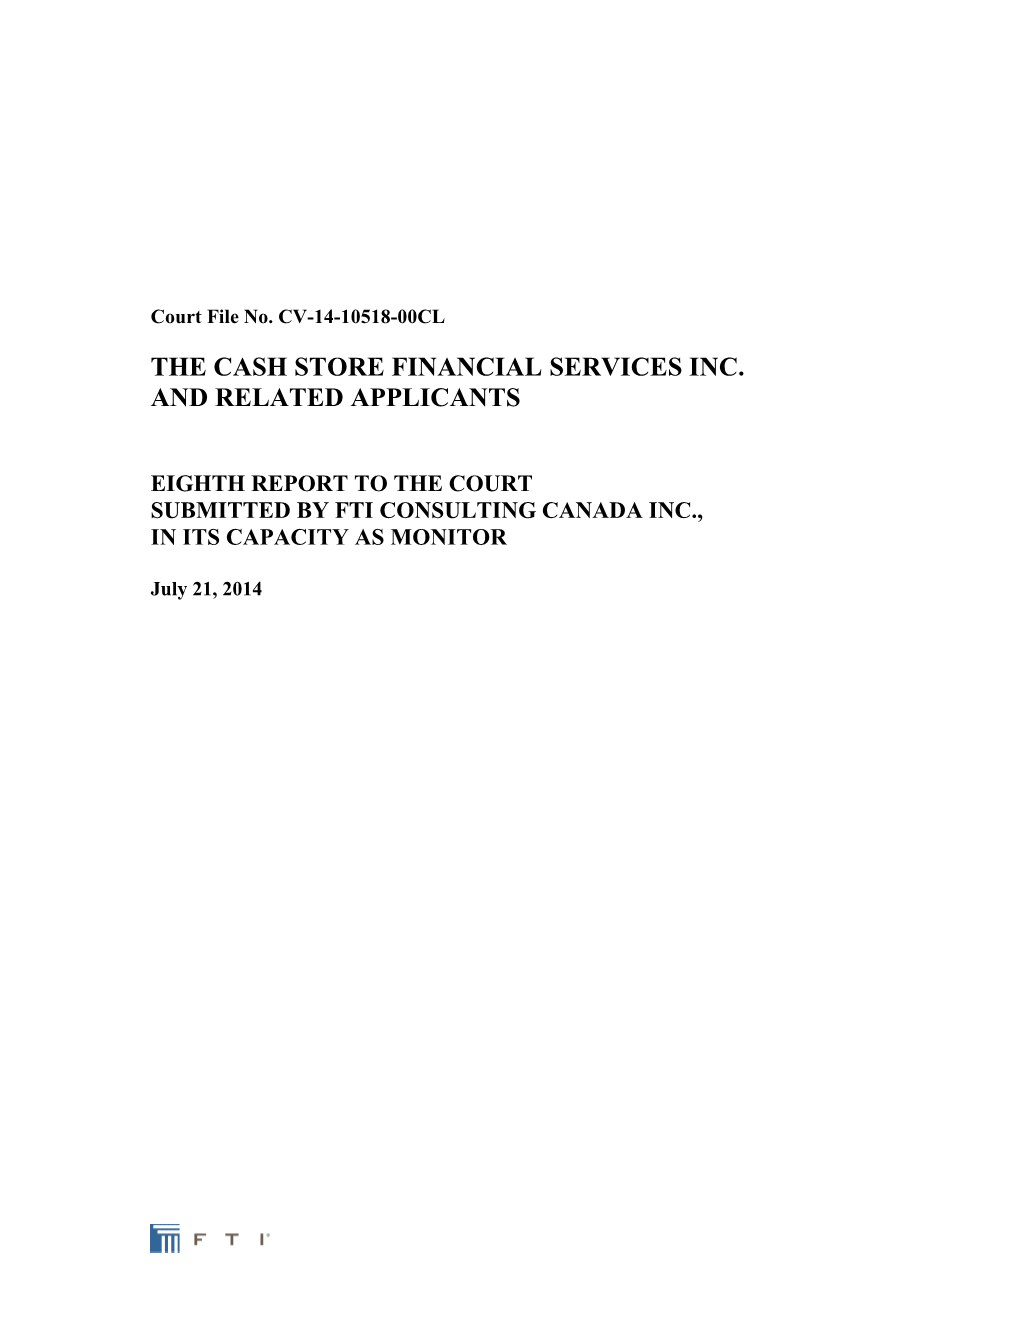 The Cash Store Financial Services Inc. and Related Applicants